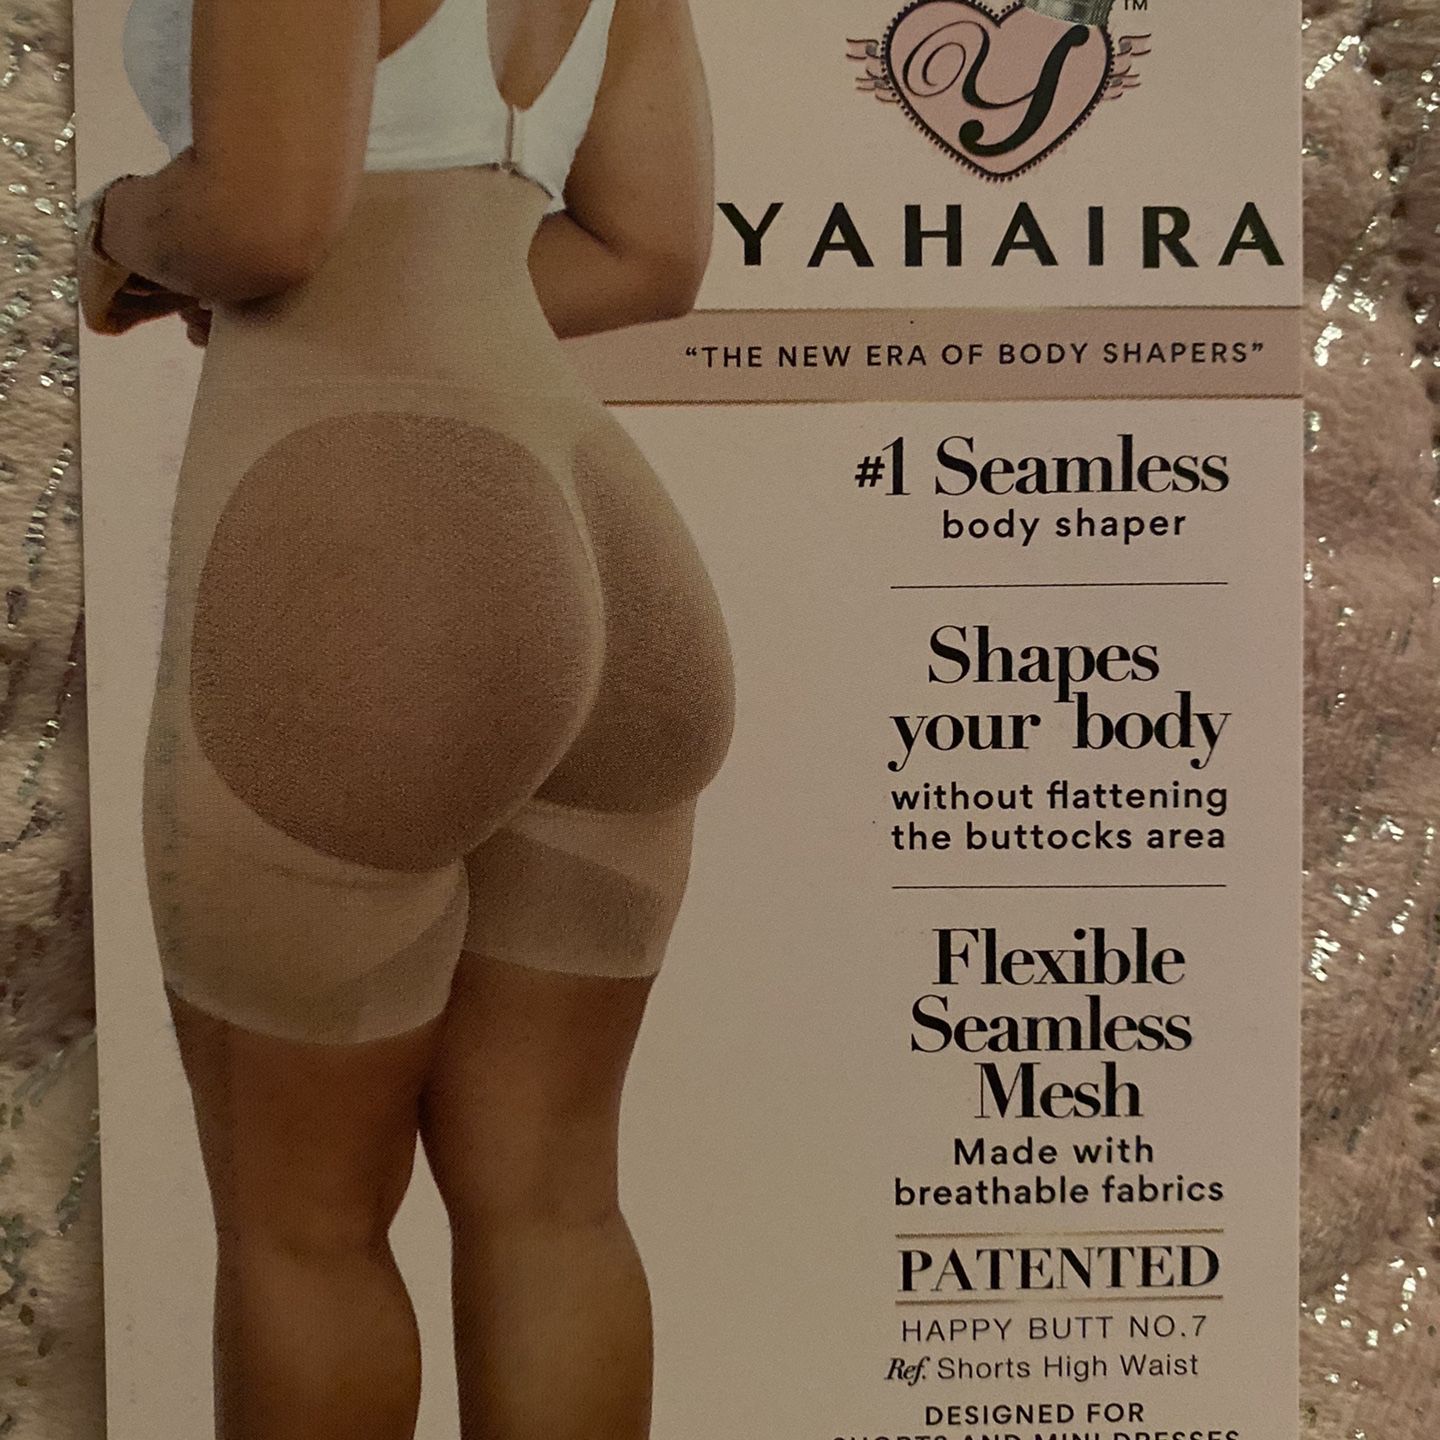 Yahaira The new era of body shapers.